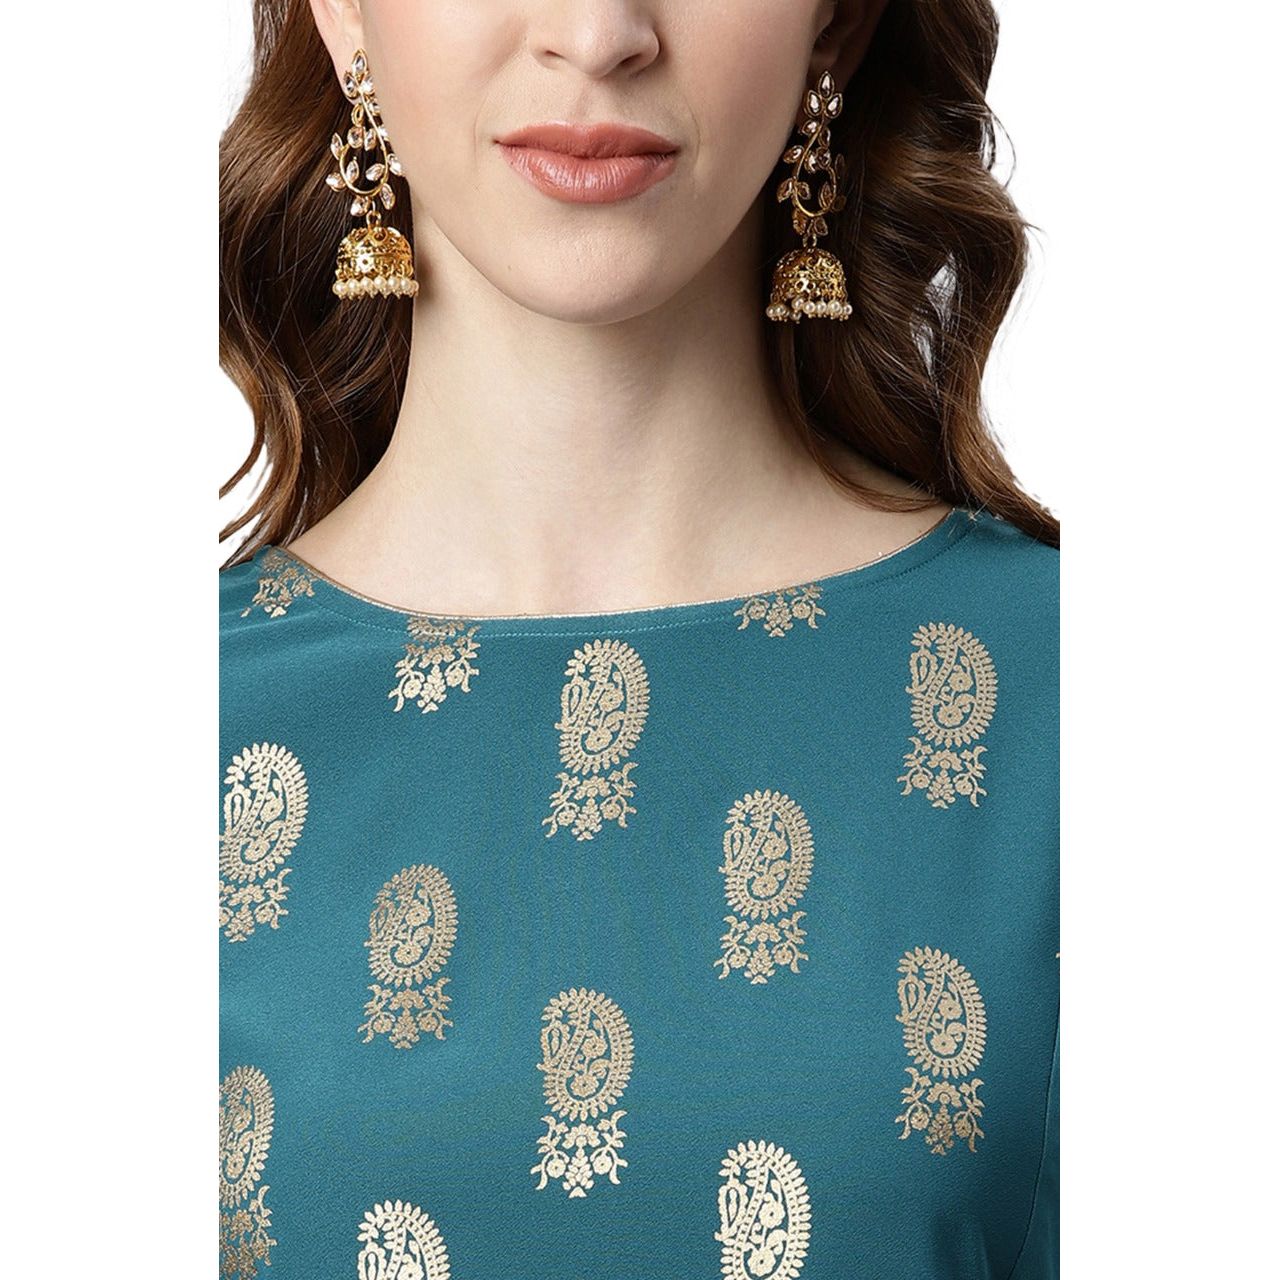 High Low Teal Green and Gold Prints Kurta for Women